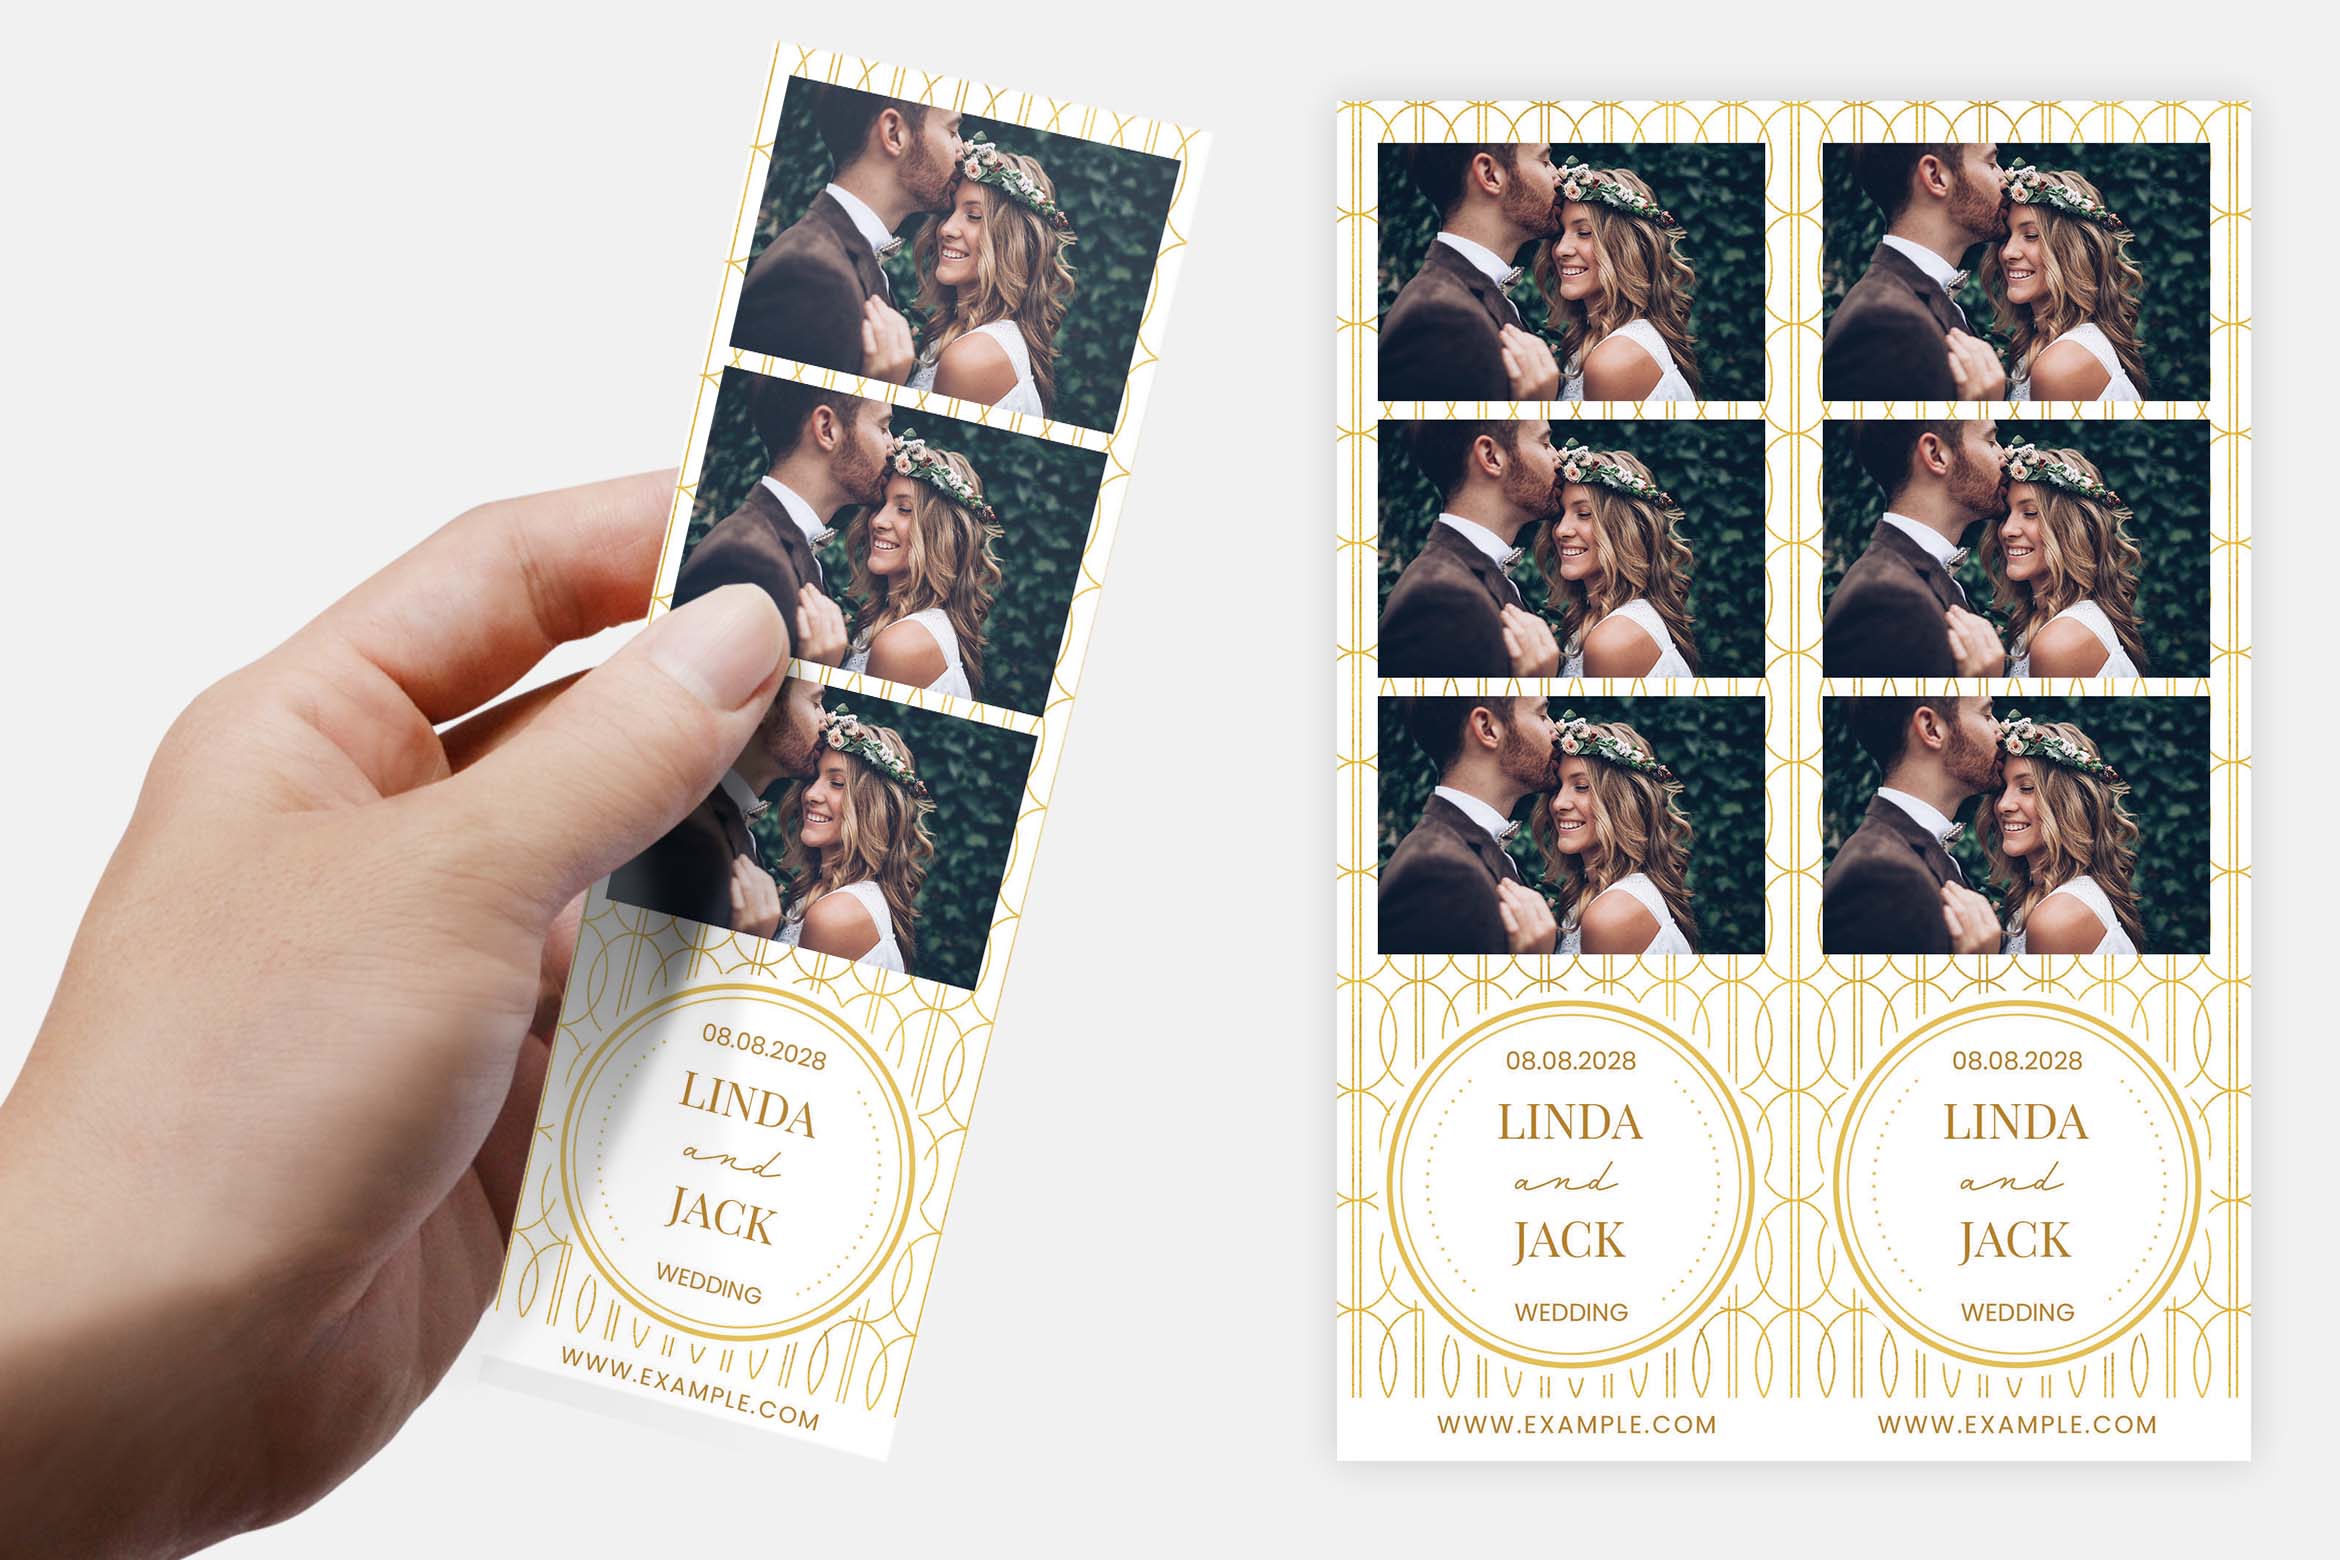 Wedding Photo Booth Template (PSD, PNG, DSLR Booth)